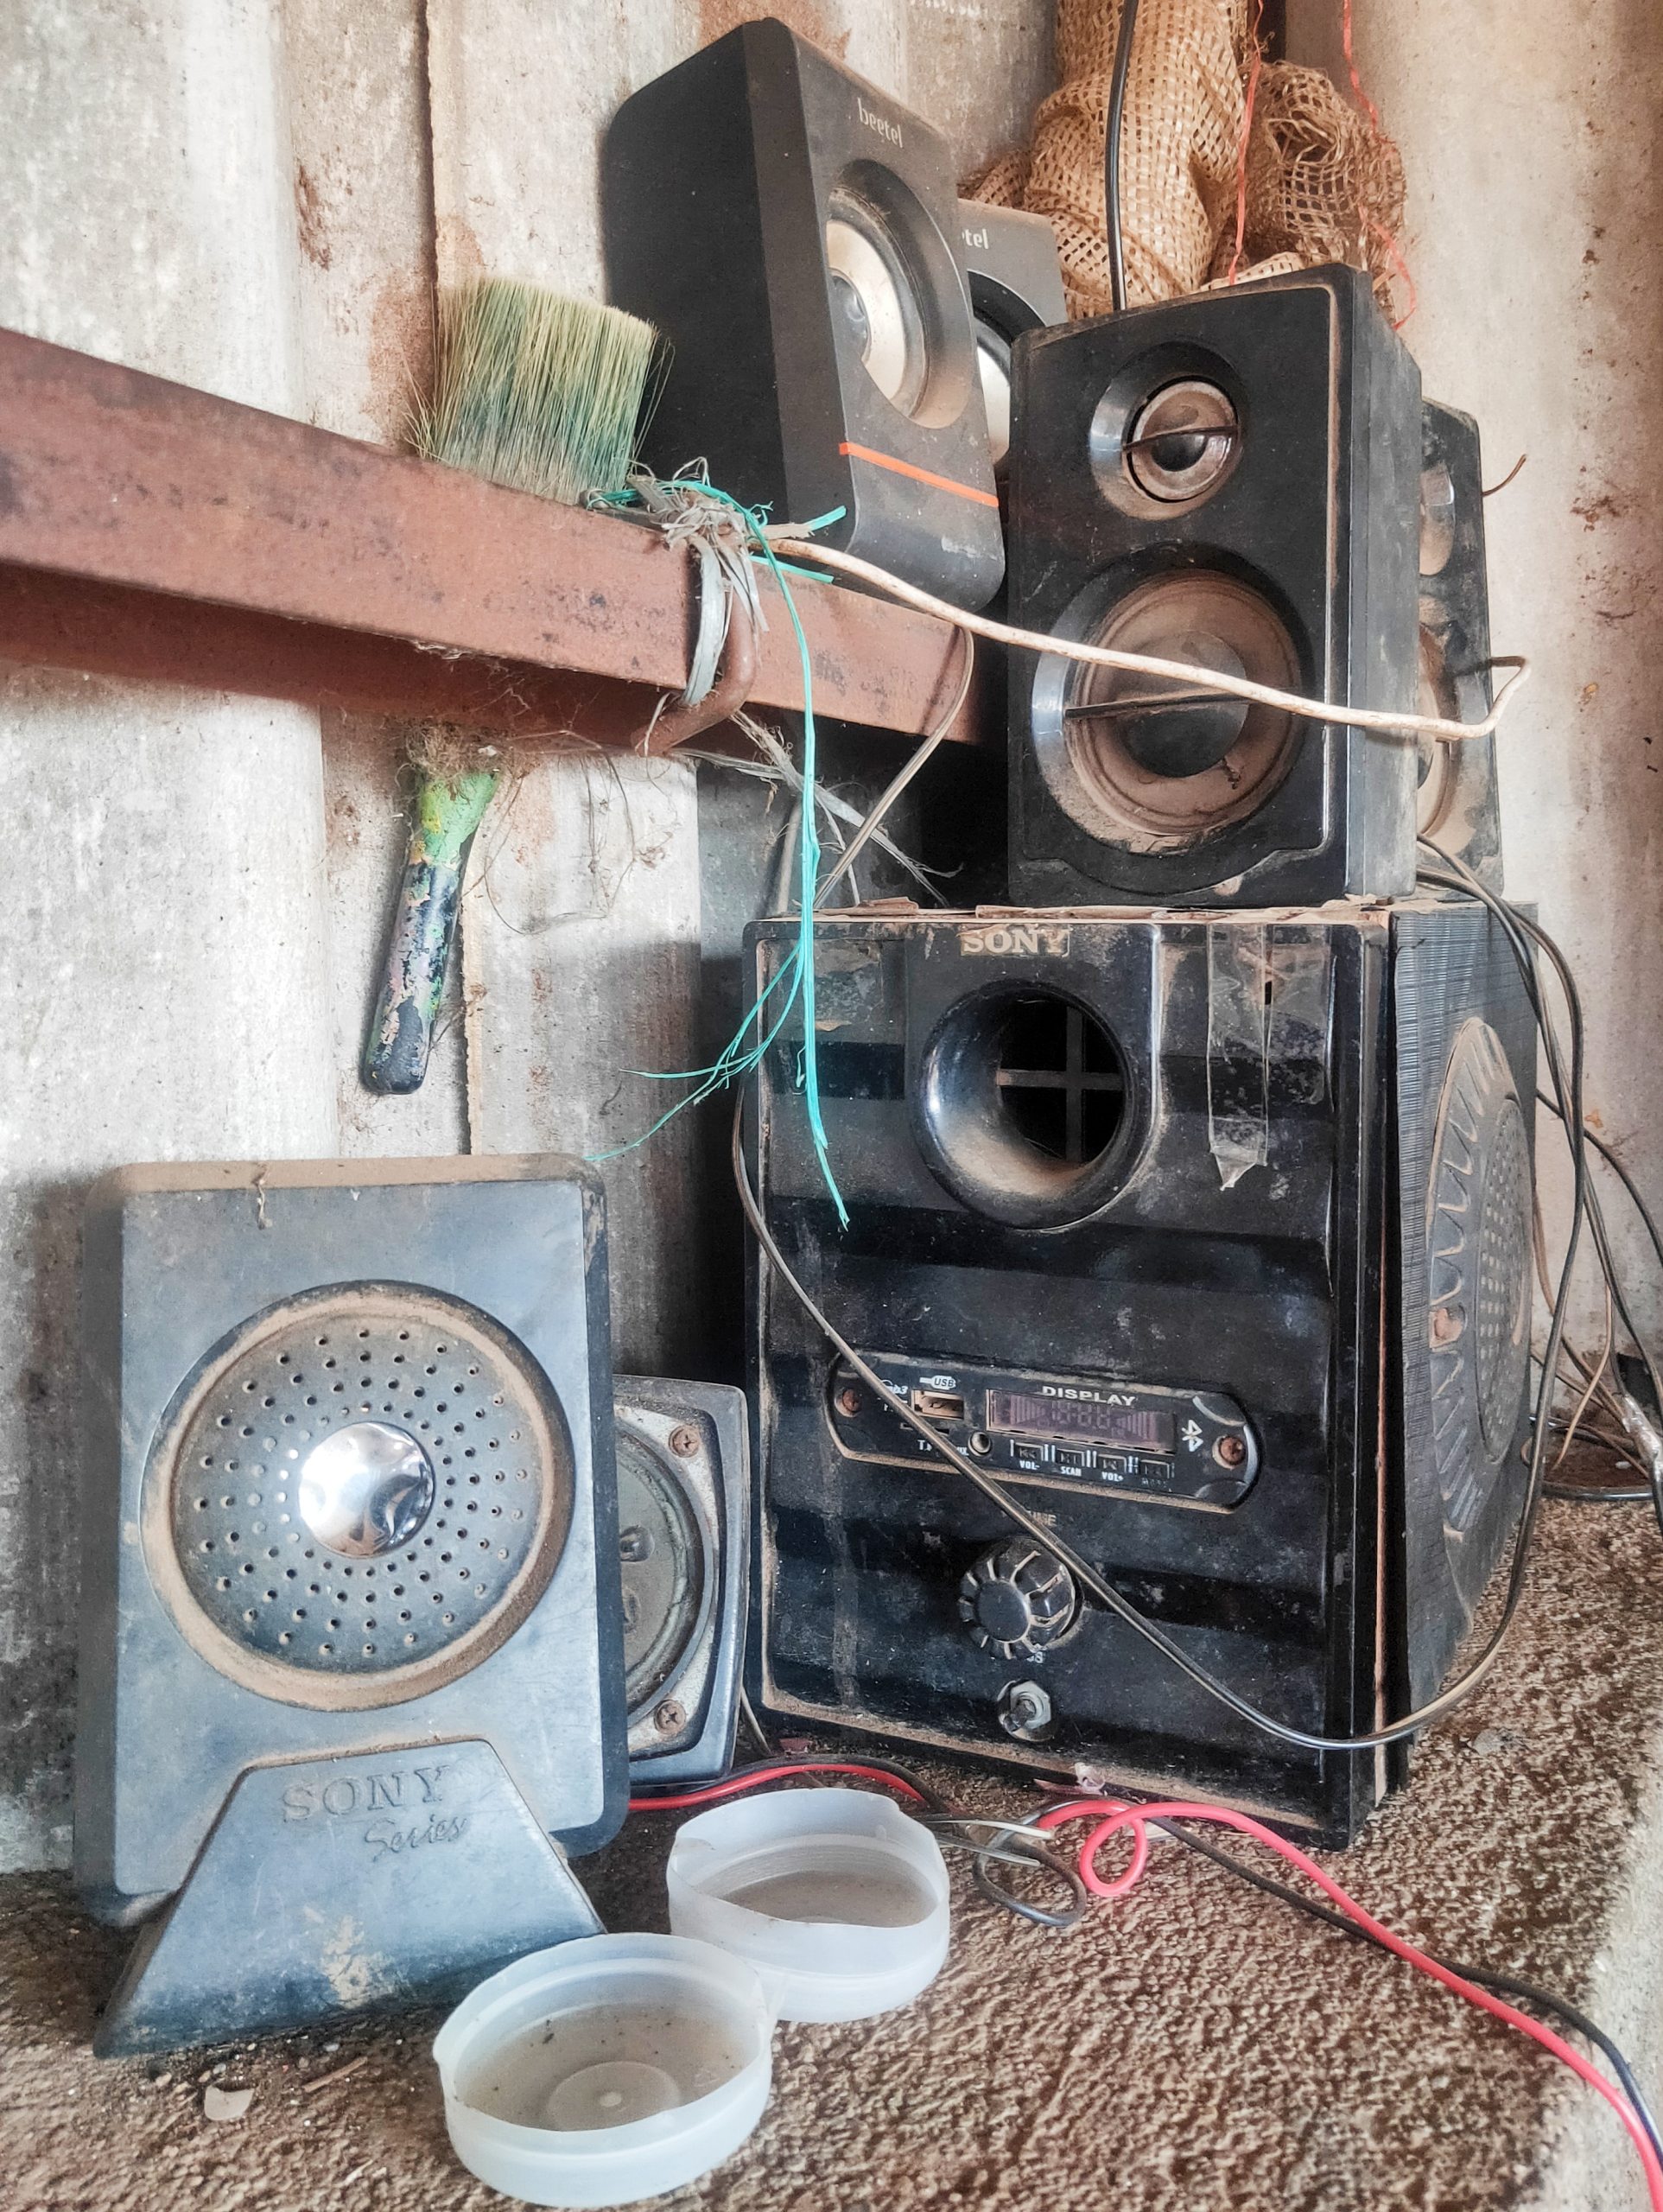 An old music player